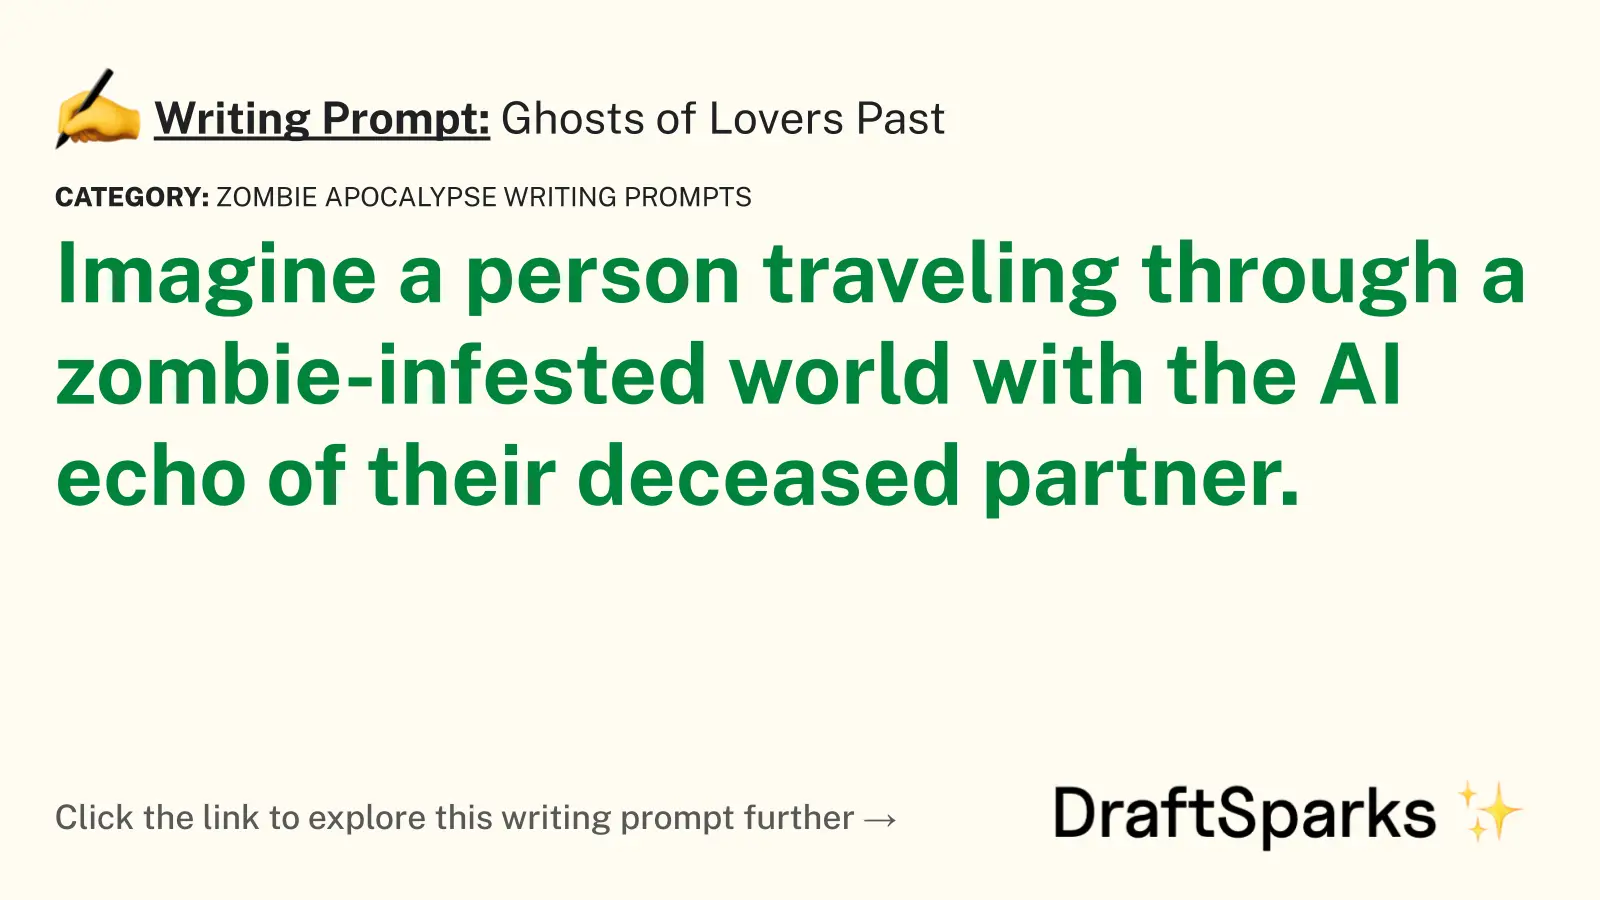 Ghosts of Lovers Past